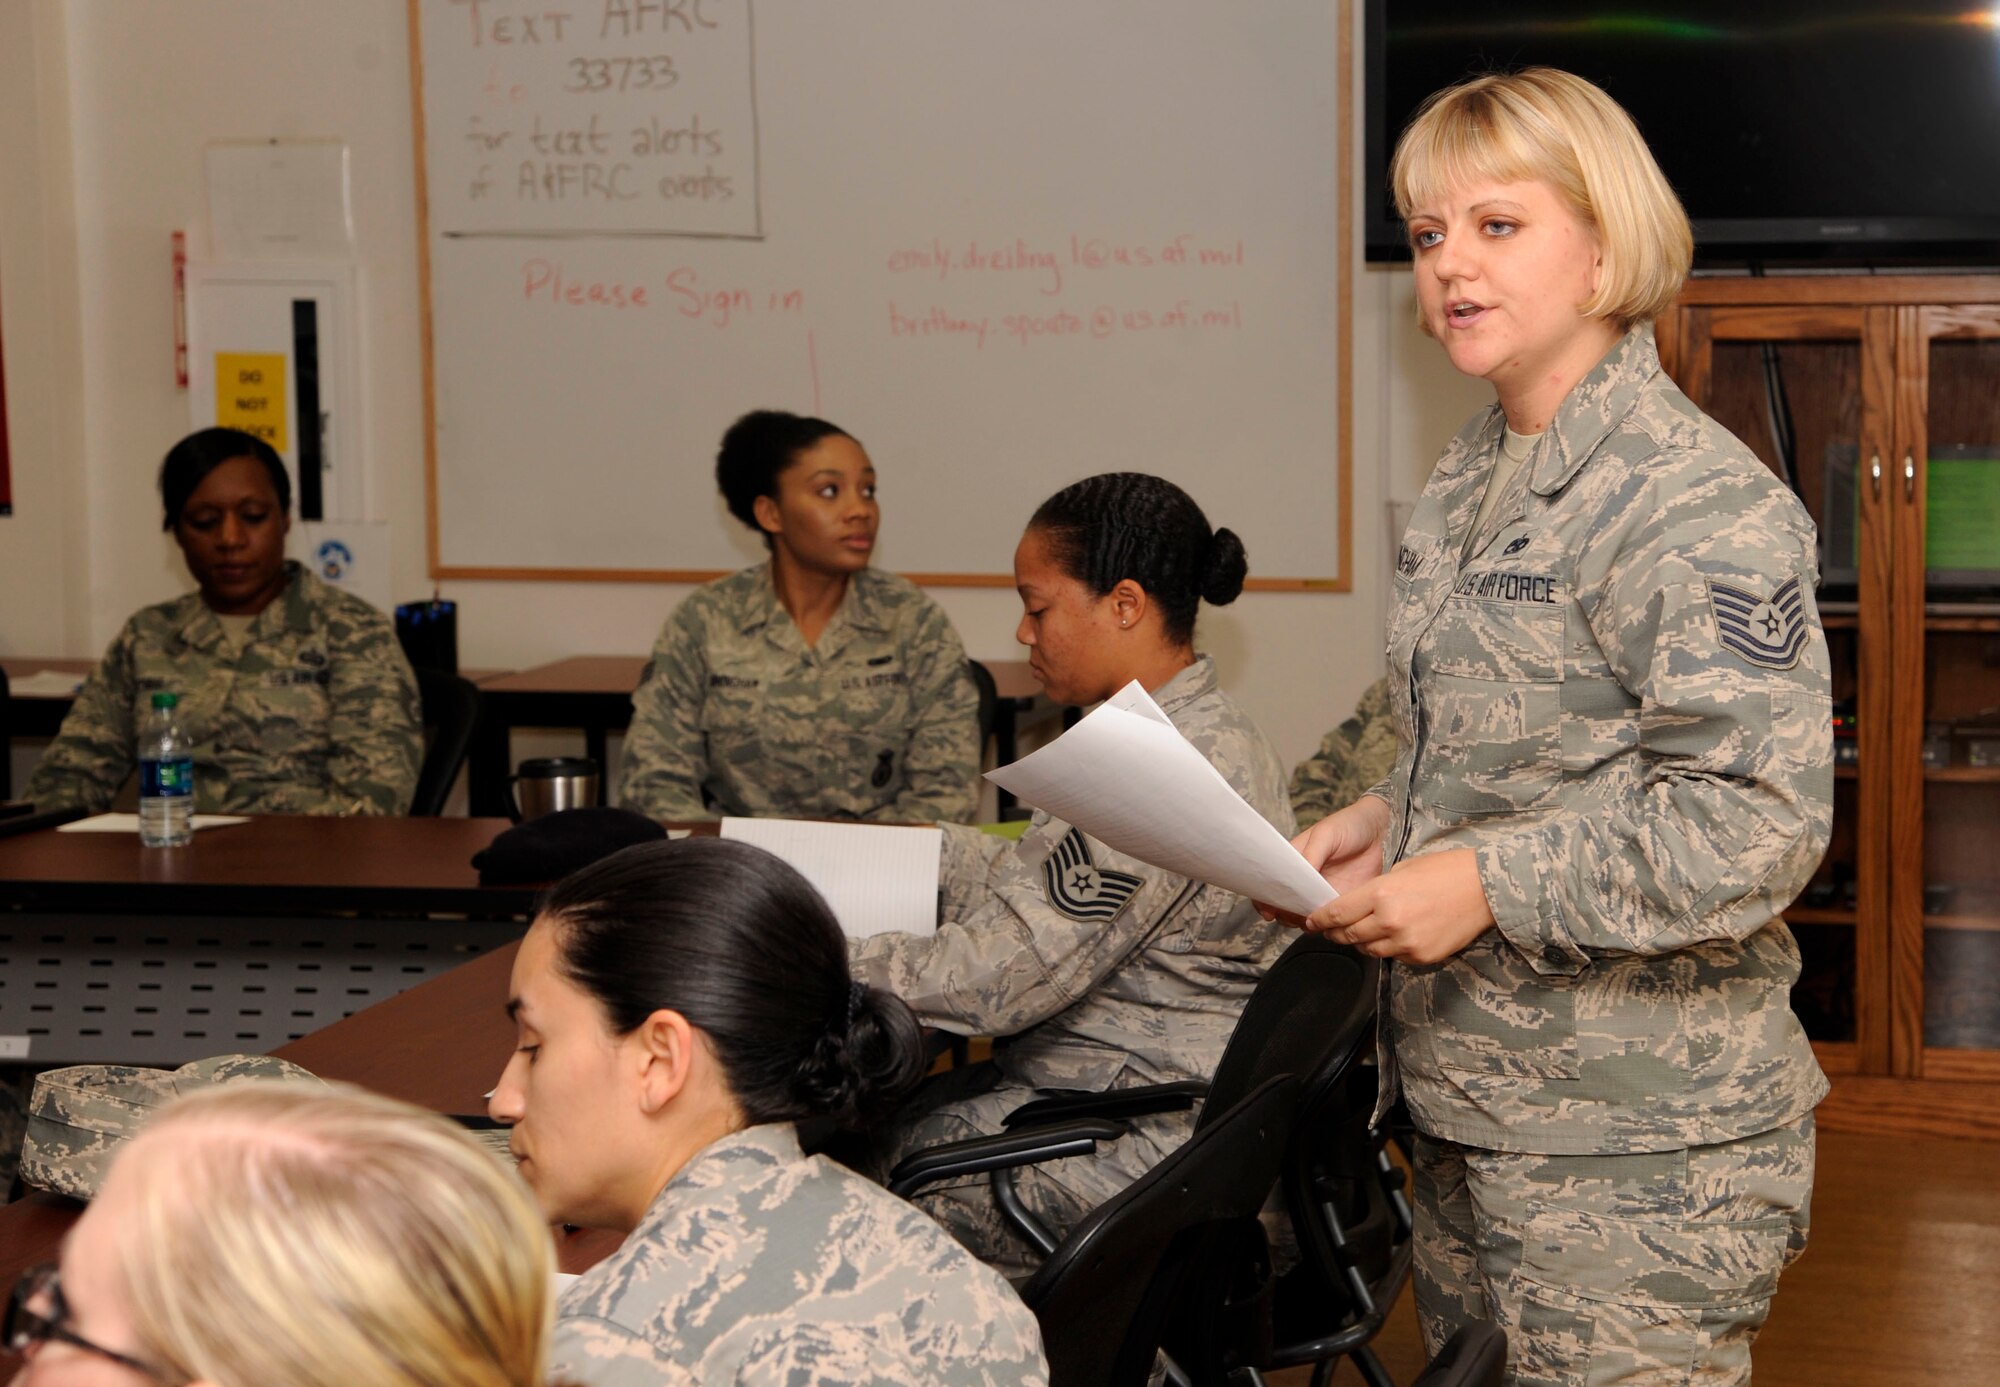 Tech. Sgt. Jennifer Cunningham, 30th Force Support Squadron Airman Leadership School instructor, speaks during the Mentorship Connection, Nov. 19, 2014, Vandenberg Air Force Base, Calif. The Mentor Connection is a group created to start a focused conversation on how to approach unique challenges as women in the military. (U.S. Air Force photo by Staff Sgt. Jim Araos/Released)